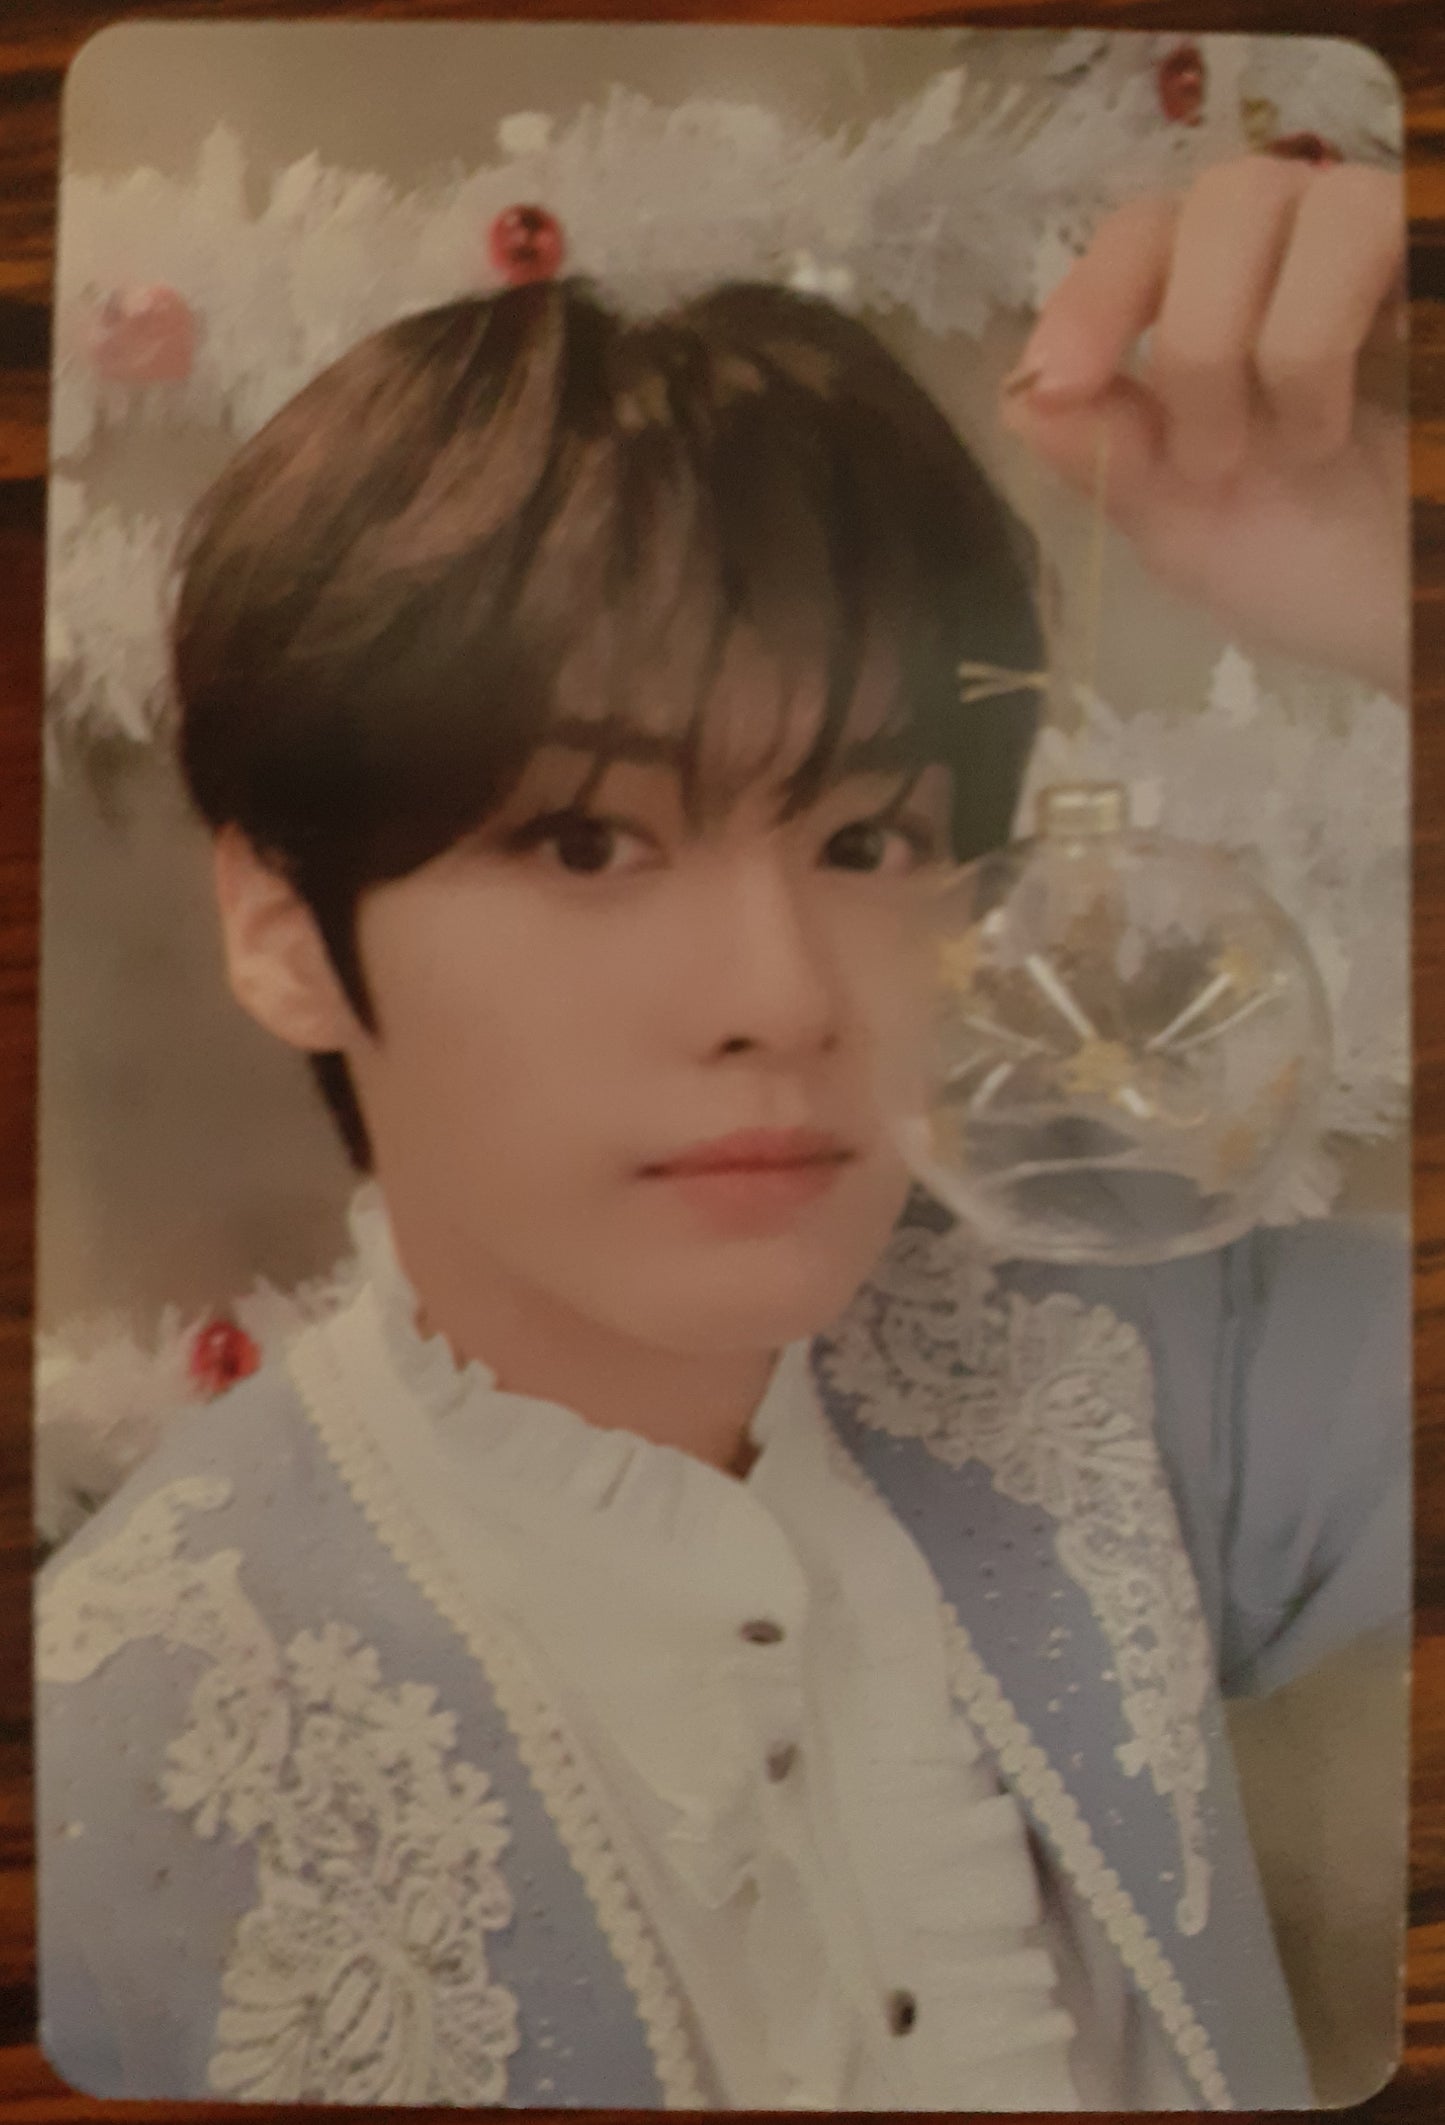 Photocard  STRAYKIDS  The sound  First japanese album  Lee know